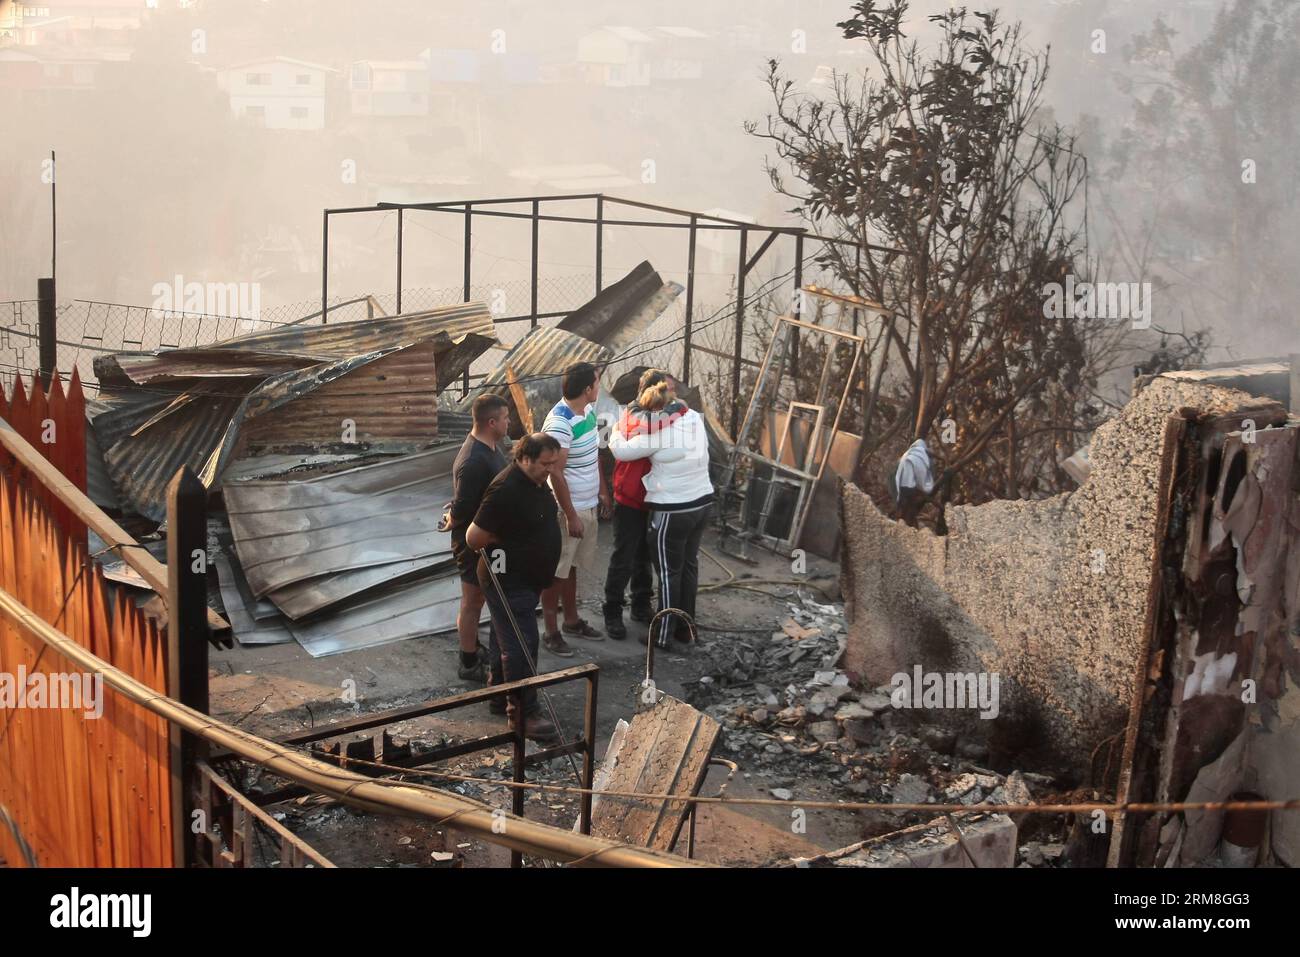 Residents stand next to their houses destroyed by a fire in Valparaiso, Chile on April 13, 2014. At least 11 people were killed over the weekend in a massive forest fire that broke out in Chile s port city of Valparaiso, authorities said Sunday. President Michelle Bachelet declared state of emergency in the city and sent the army in to maintain order as thousands of residents were evacuated. (Xinhua/Pablo Ovalle/AGENCIA UNO) CHILE-VALPARAISO-FIRE PUBLICATIONxNOTxINxCHN   Residents stand Next to their Houses destroyed by a Fire in Valparaiso Chile ON April 13 2014 AT least 11 Celebrities Were K Stock Photo